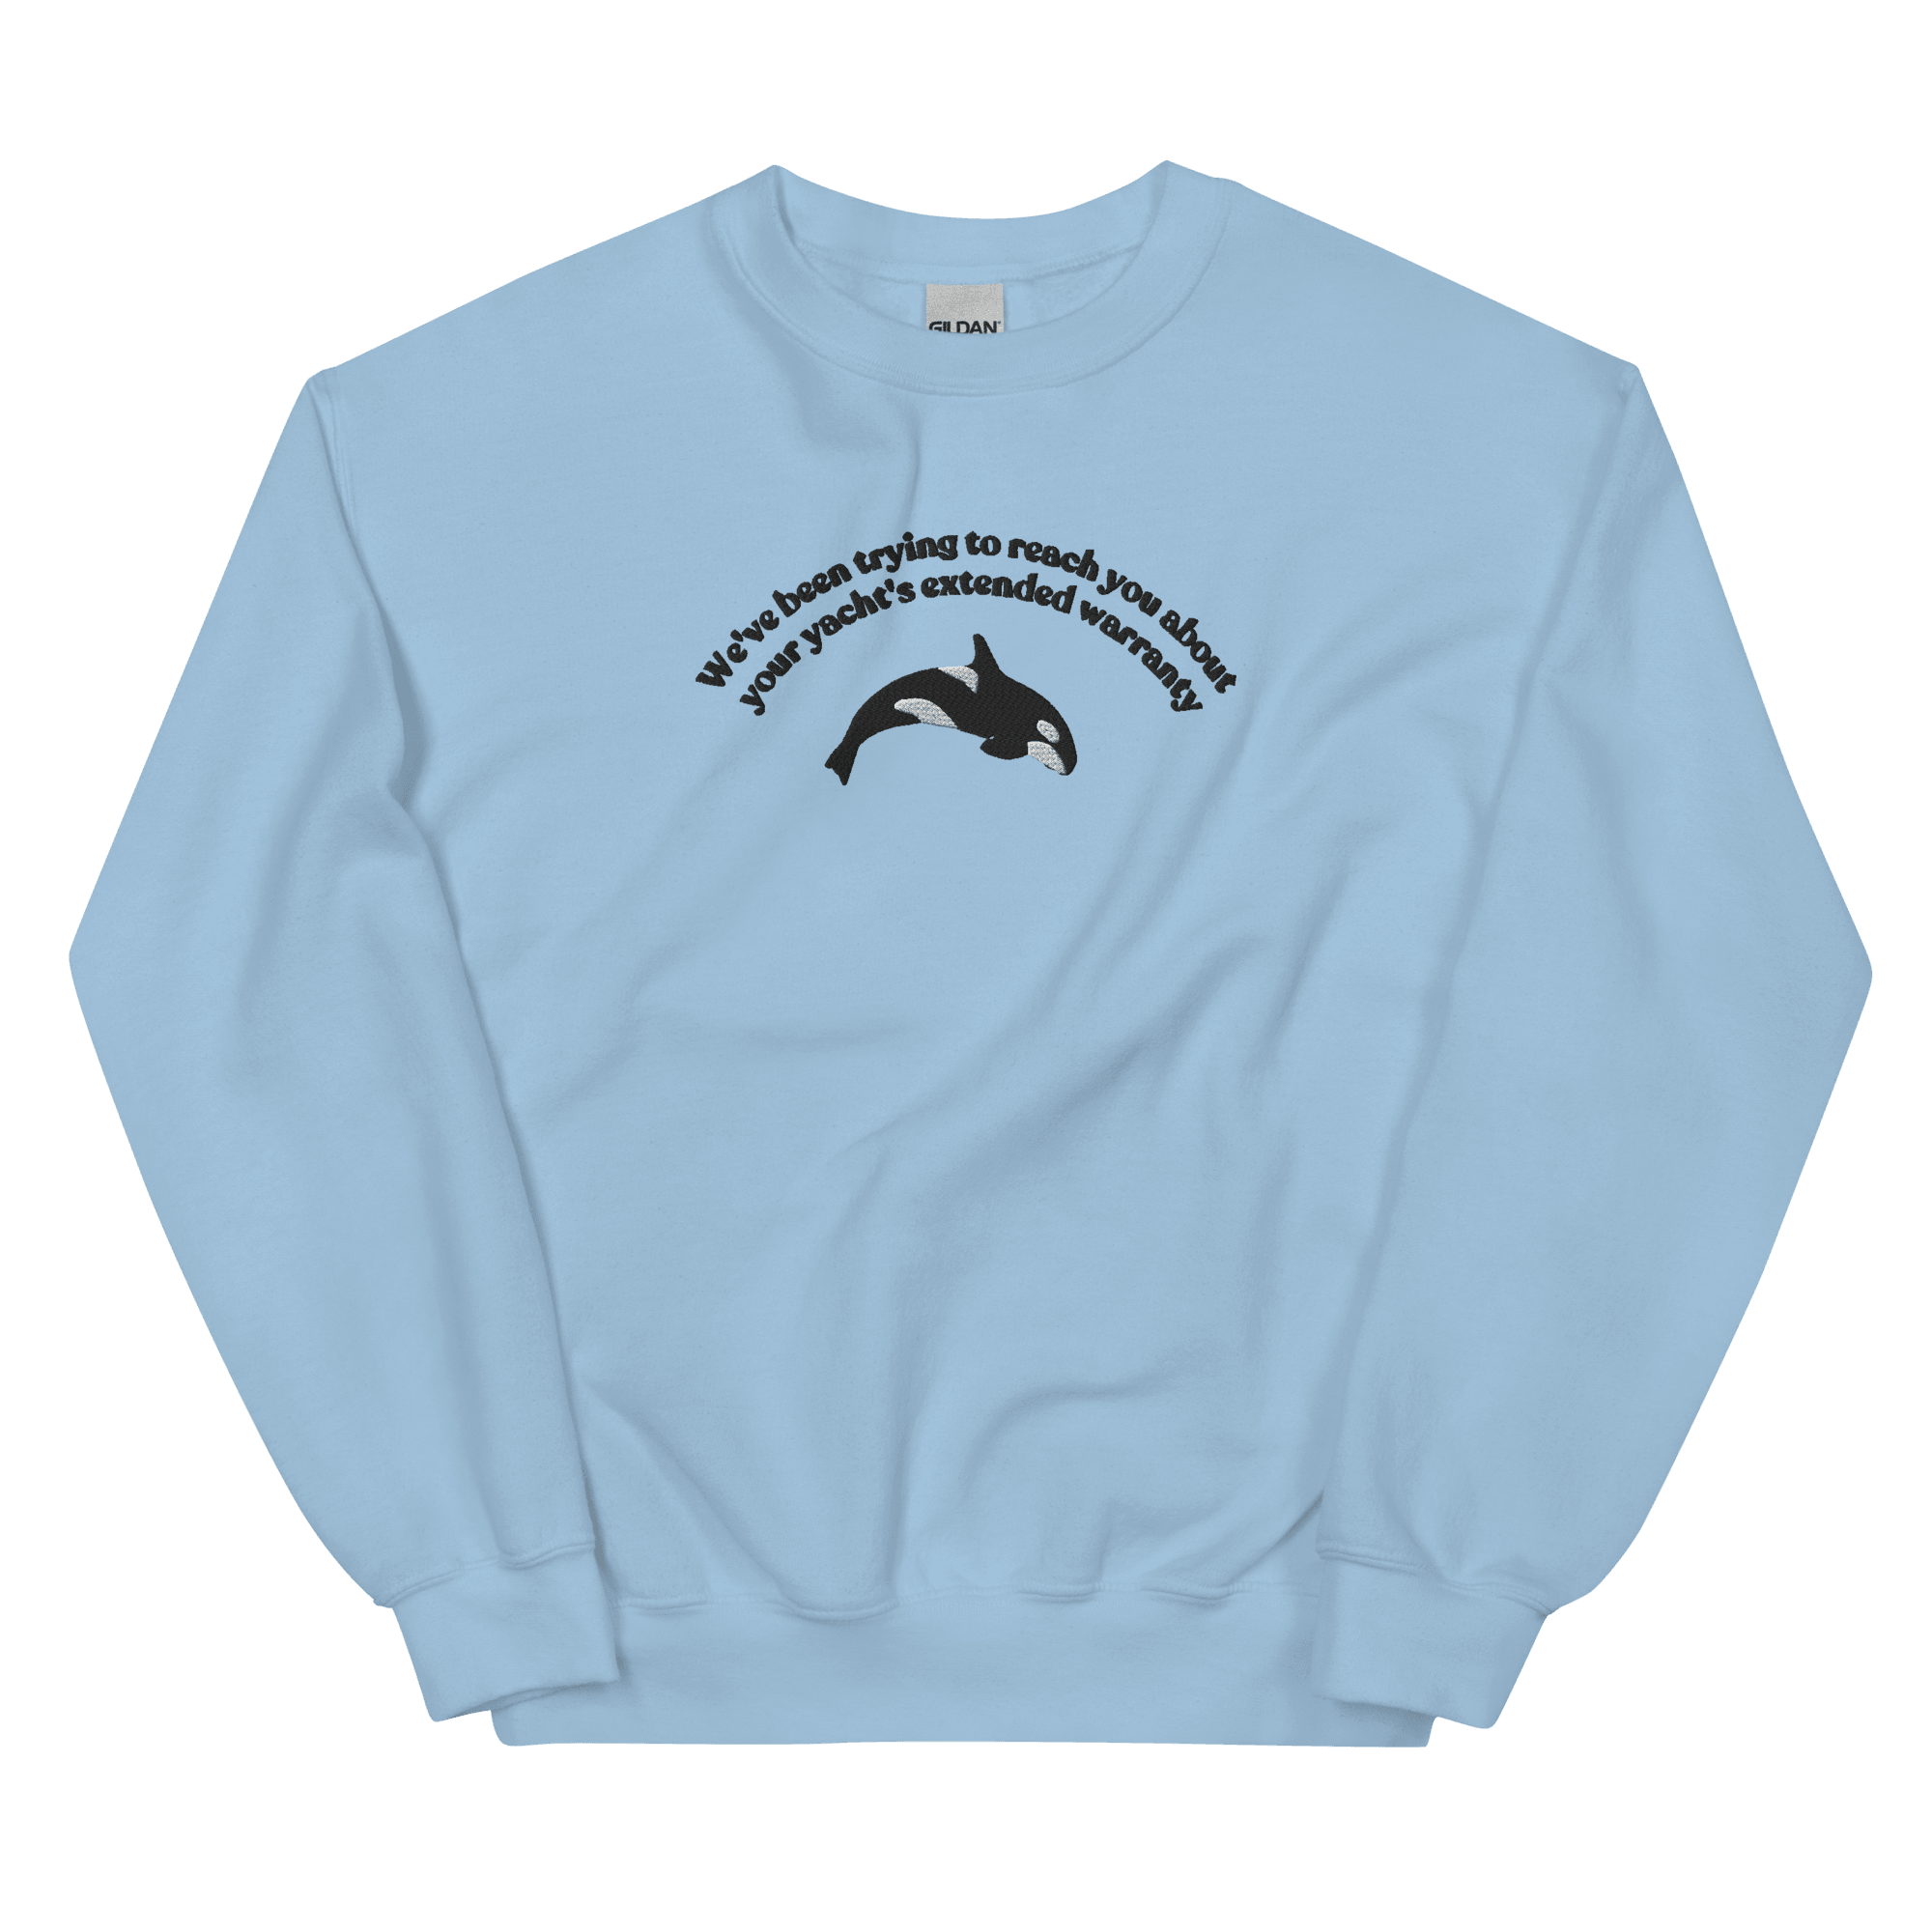 "We've been trying to reach you about your yacht's extended warranty" Embroidered Orca Whale Unisex Sweatshirt - Polychrome Goods 🍊